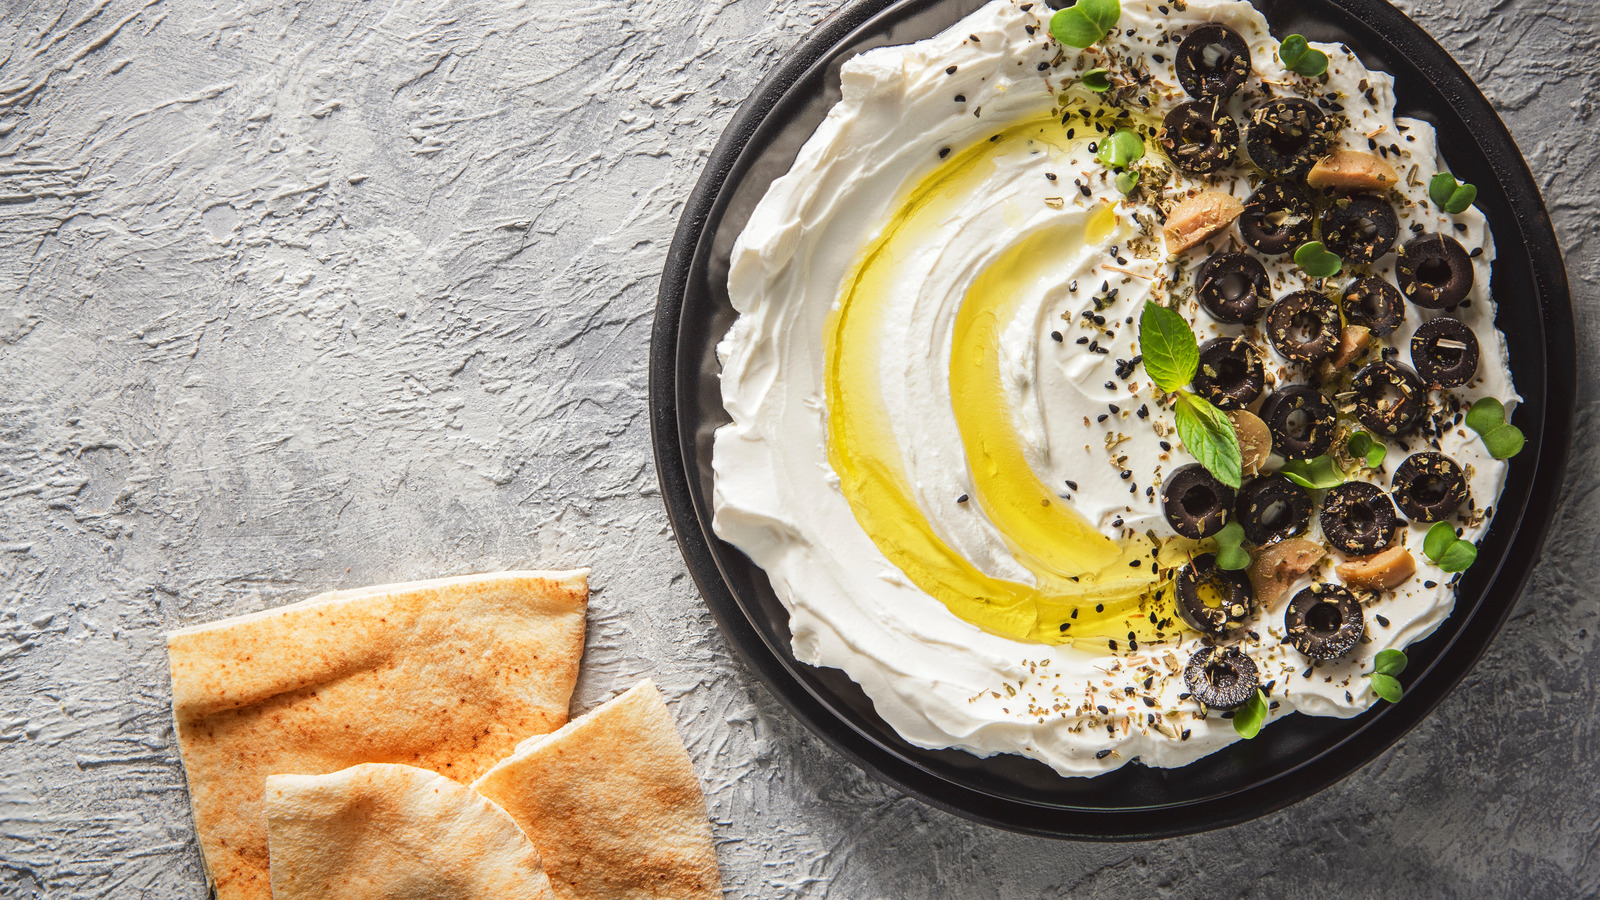 Whip Up Cream Cheese And Greek Yogurt For An Extra Fluffy Dip